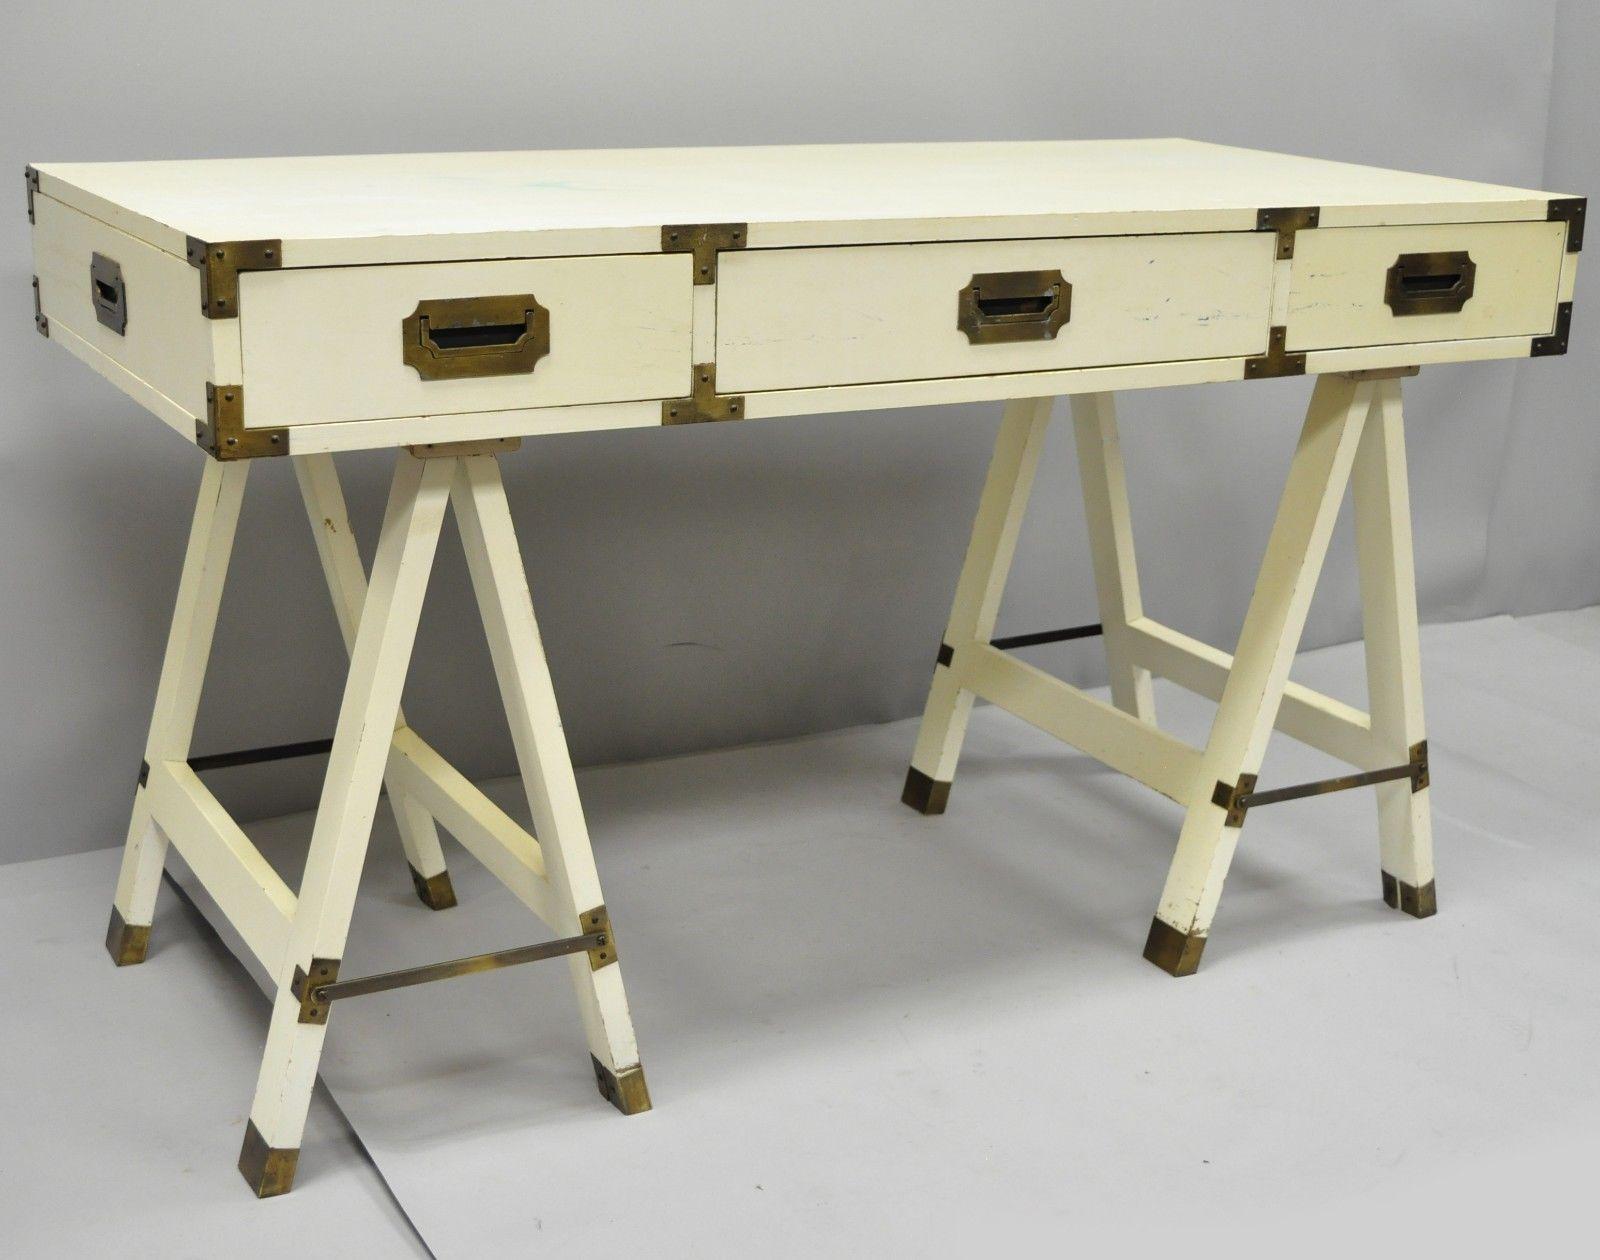 Vintage Bernhardt Campaign style double sawhorse base writing desk. Great to refinish. Item details brass accents, finished back, three dovetailed drawers, quality American craftsmanship, and great style and form, mid-20th century. Measurements: 30